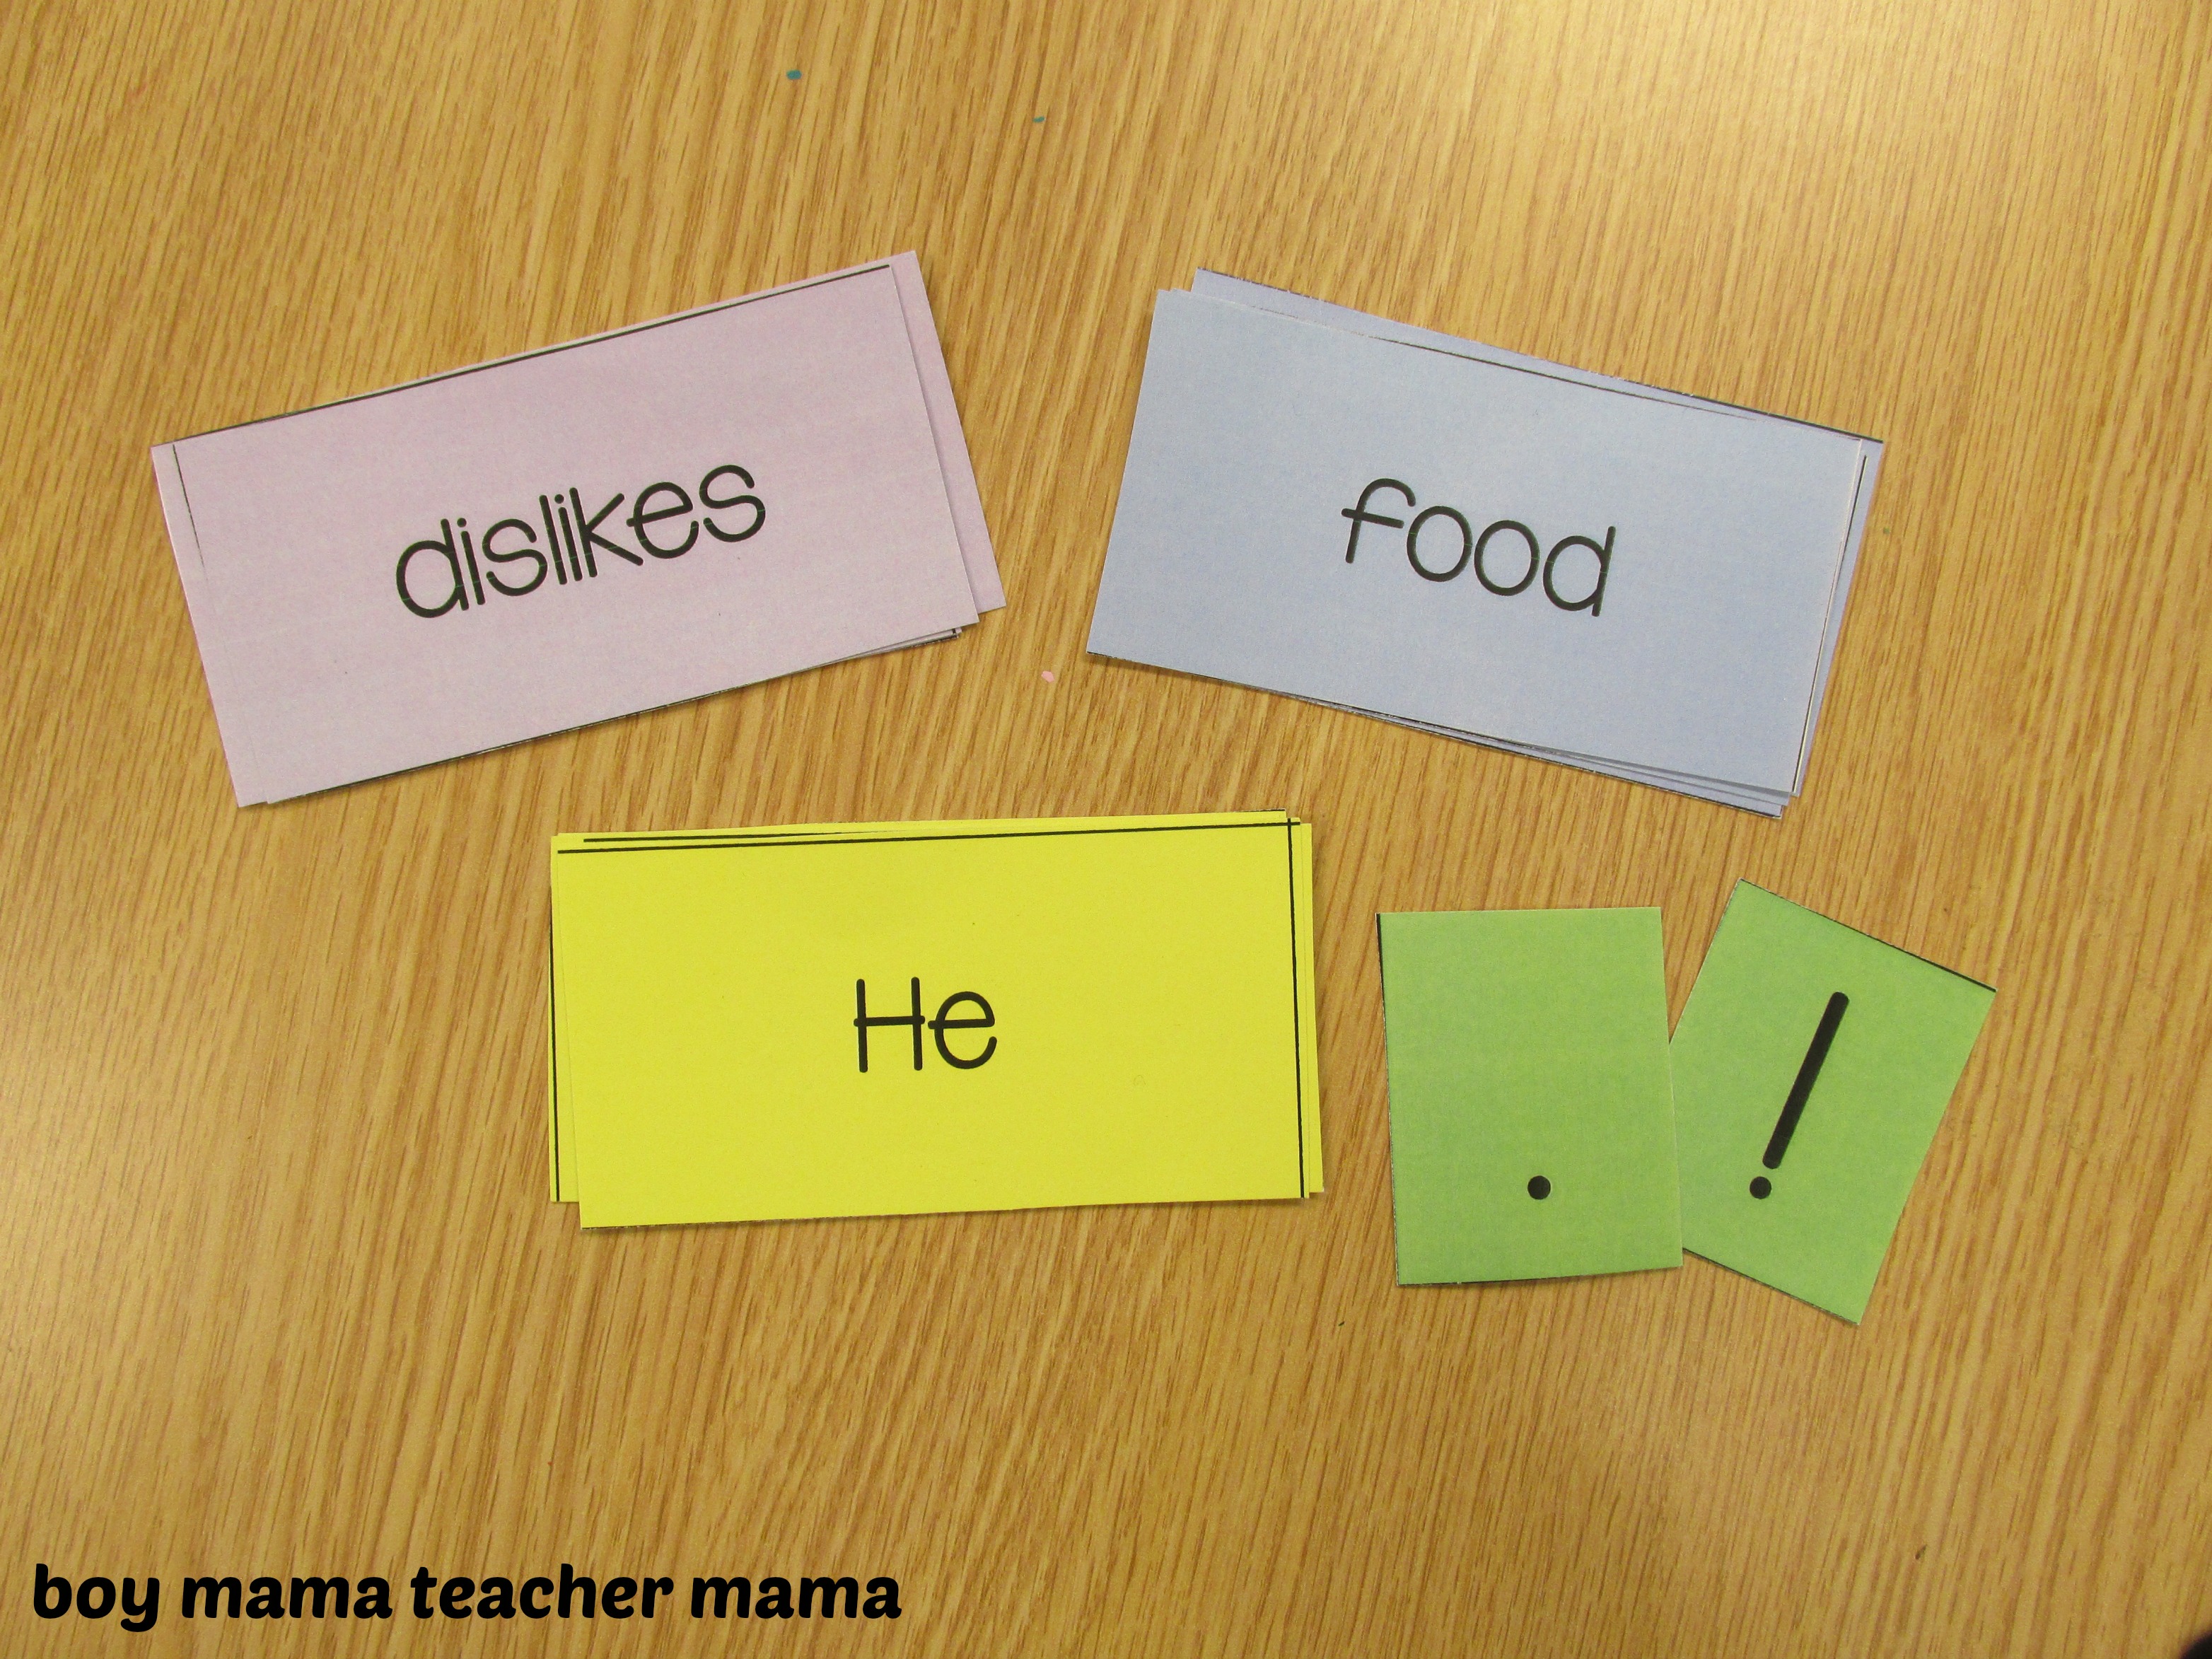 25 Hands-On Grammar Games That Make Learning Fun